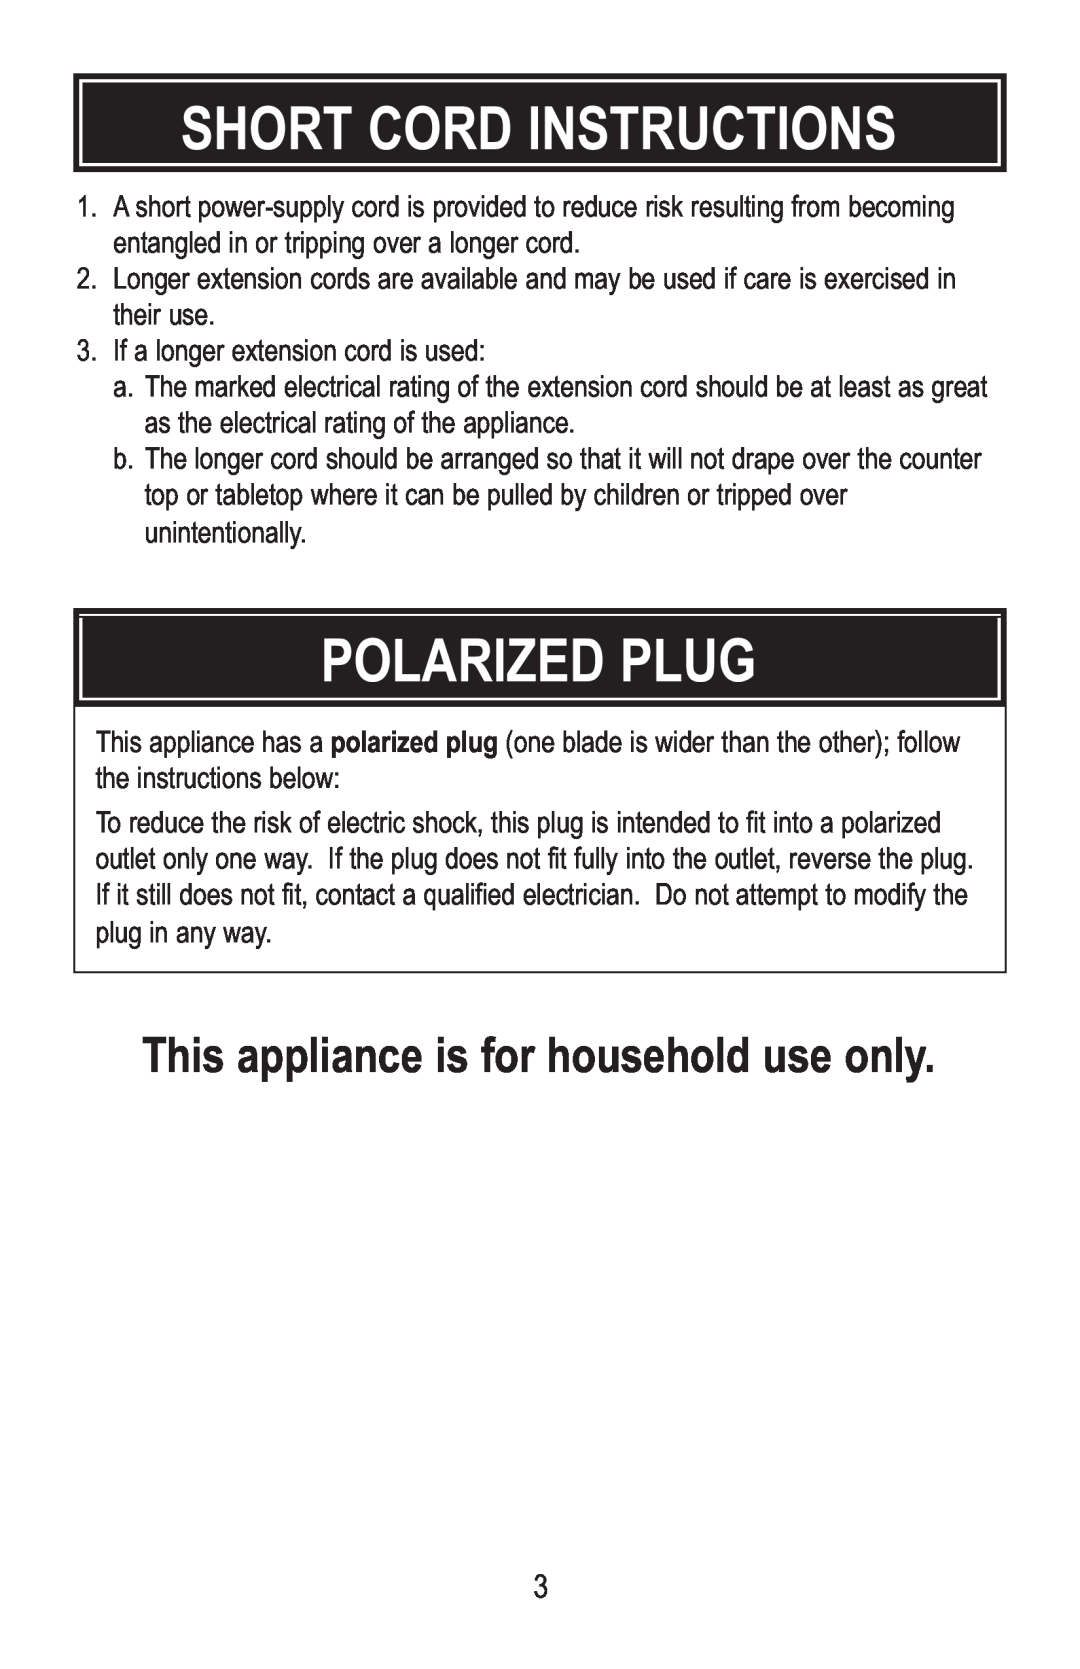 Aroma ABT-106 instruction manual Short Cord Instructions, Polarized Plug, This appliance is for household use only 